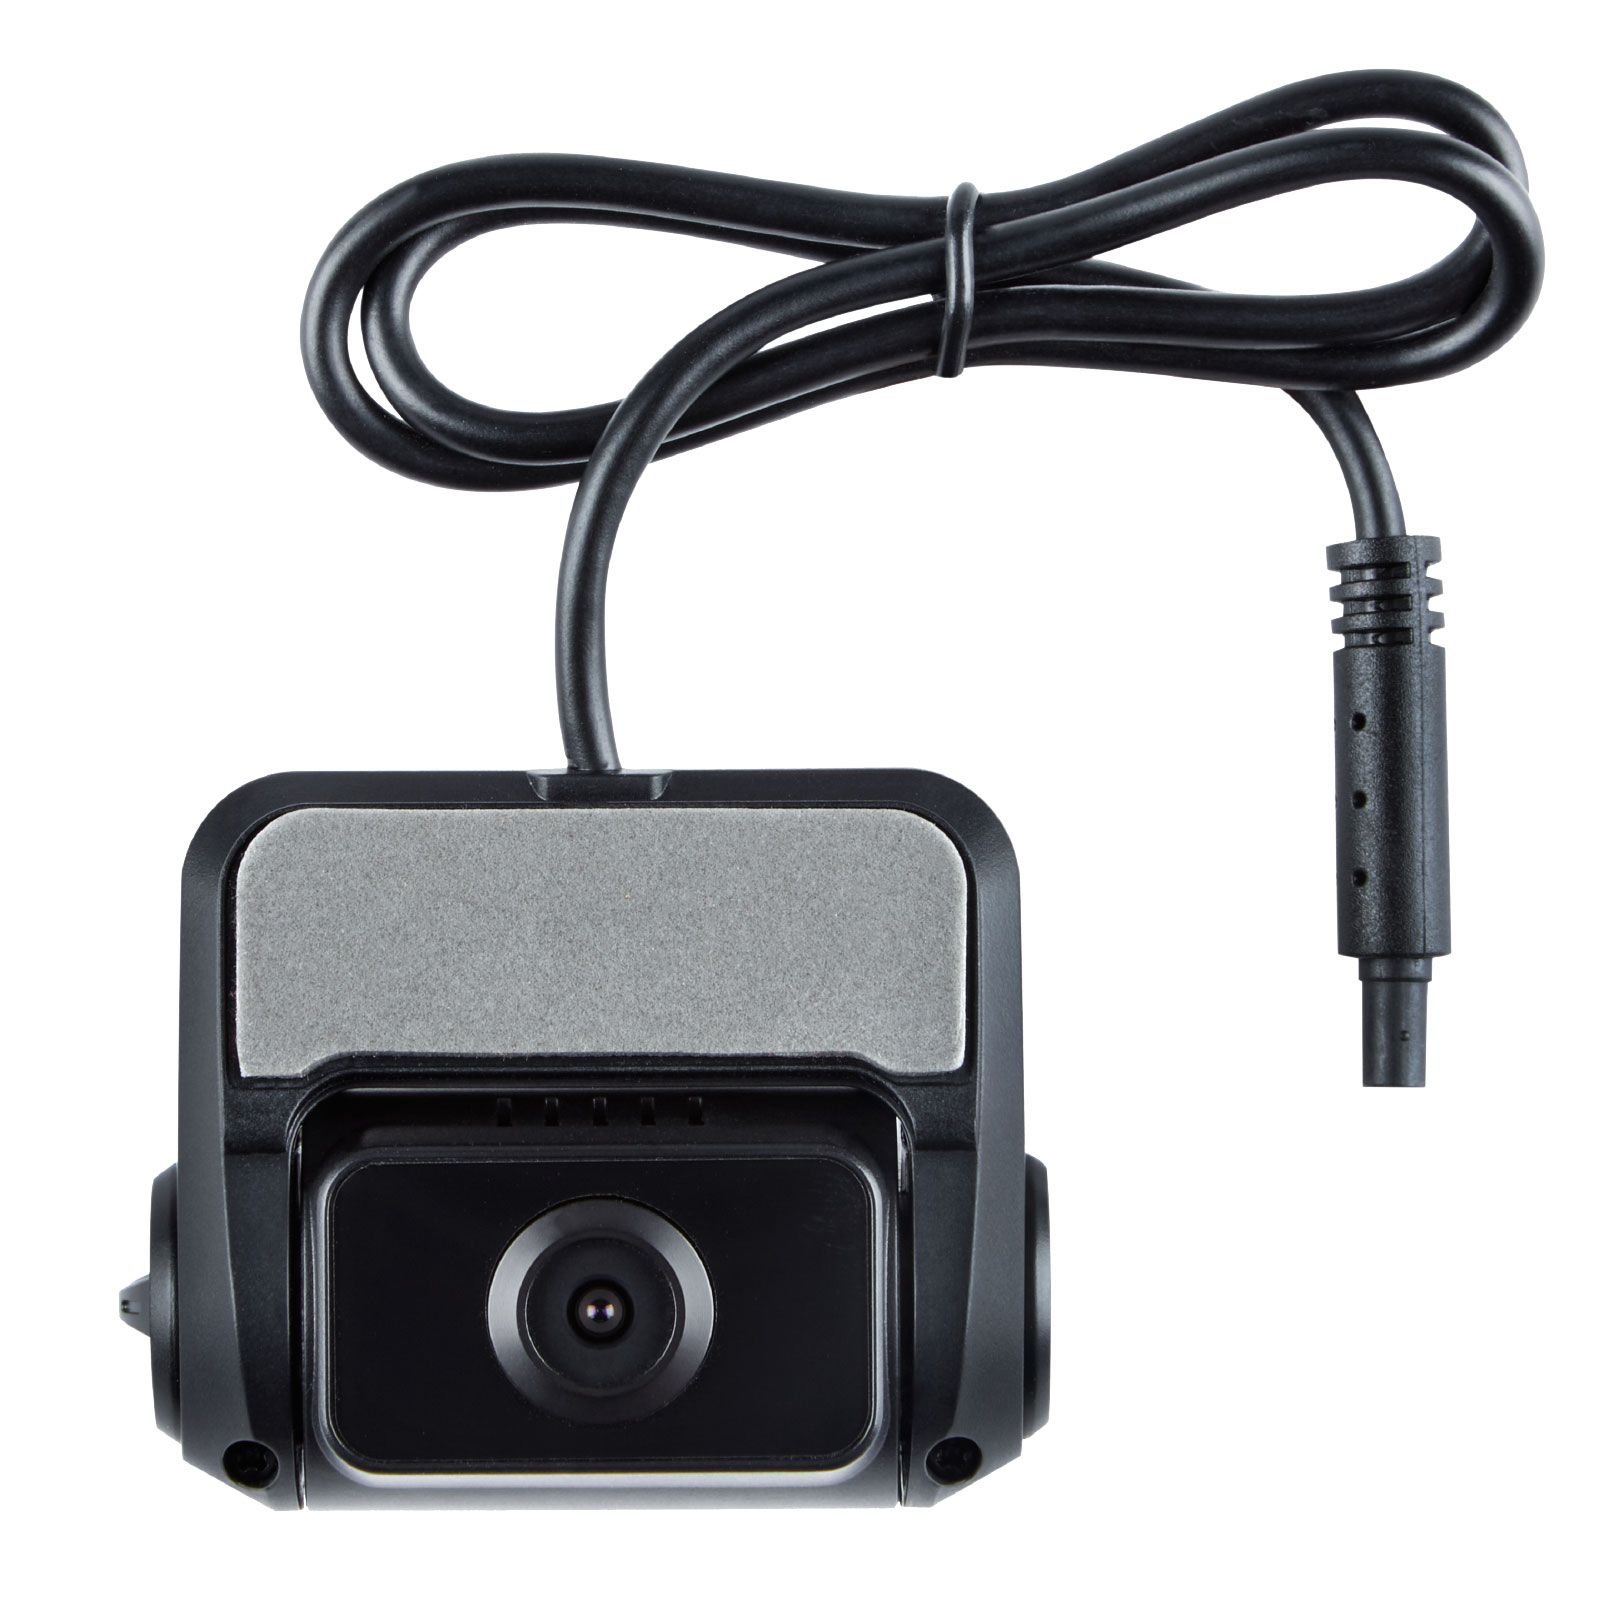 Dash Cams in Auto Electronics 